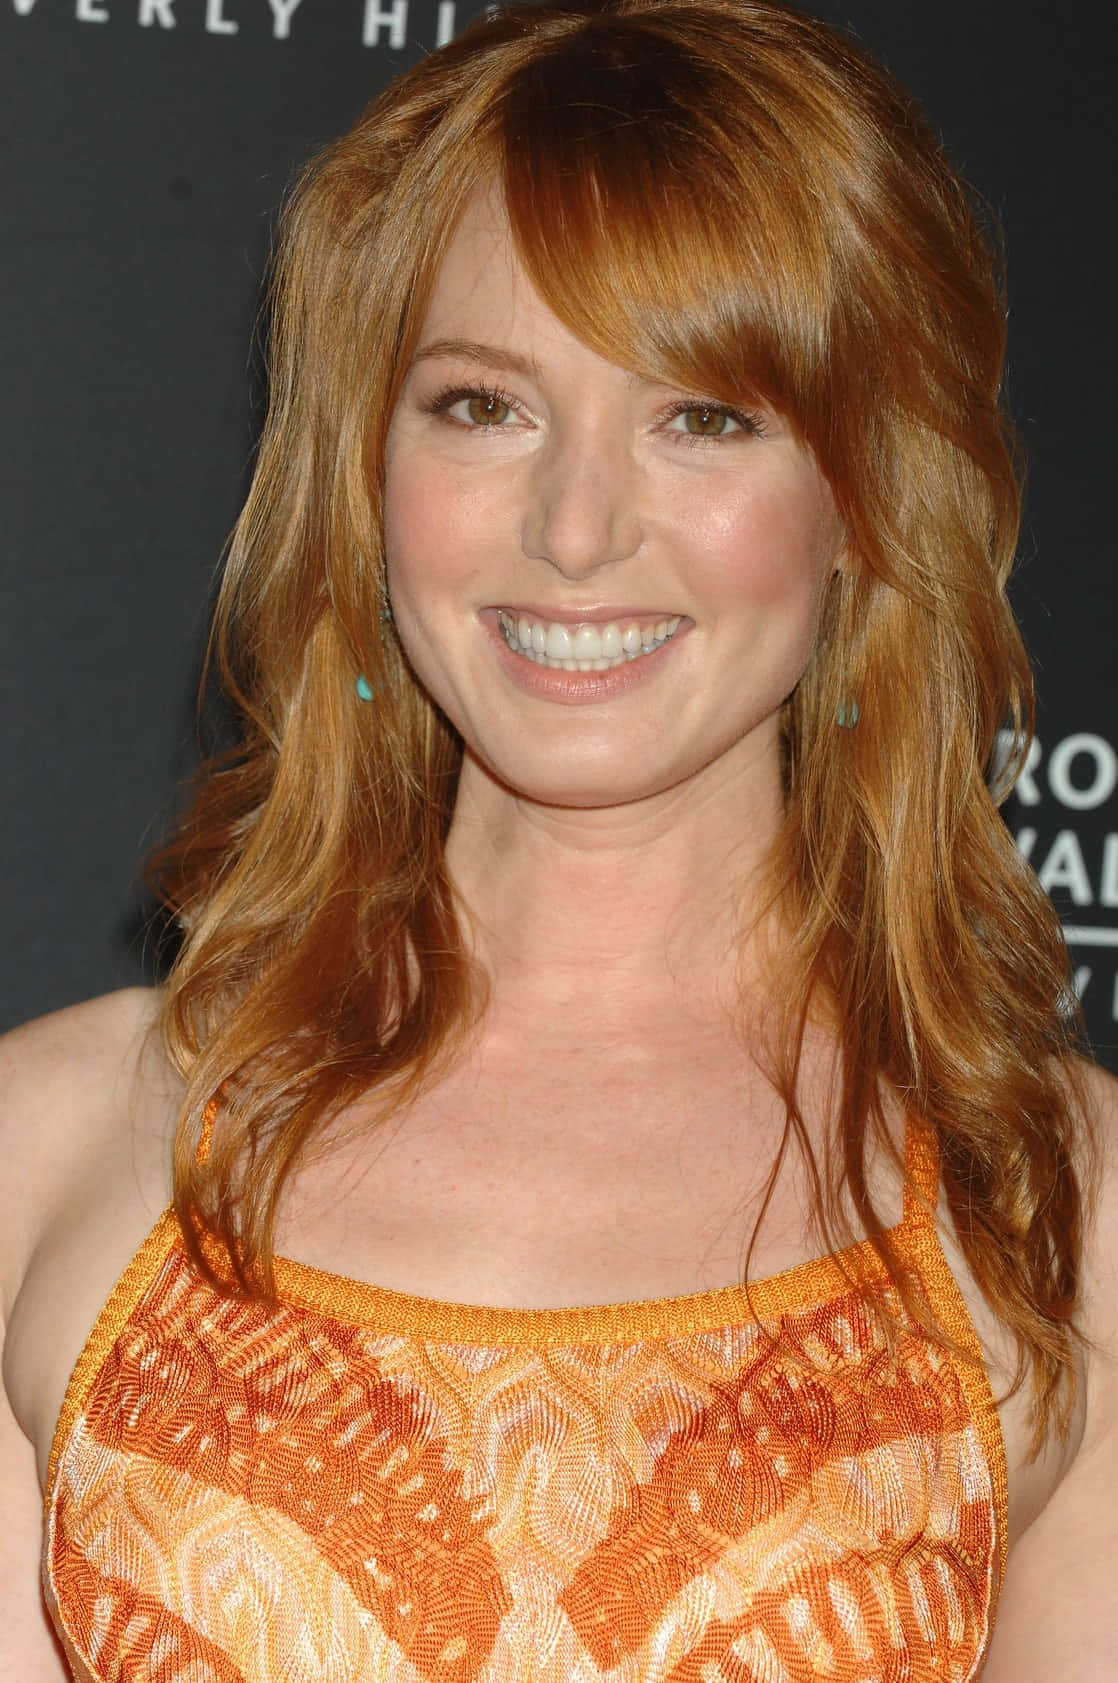 Alicia Witt striking a pose in an elegant outfit. Wallpaper